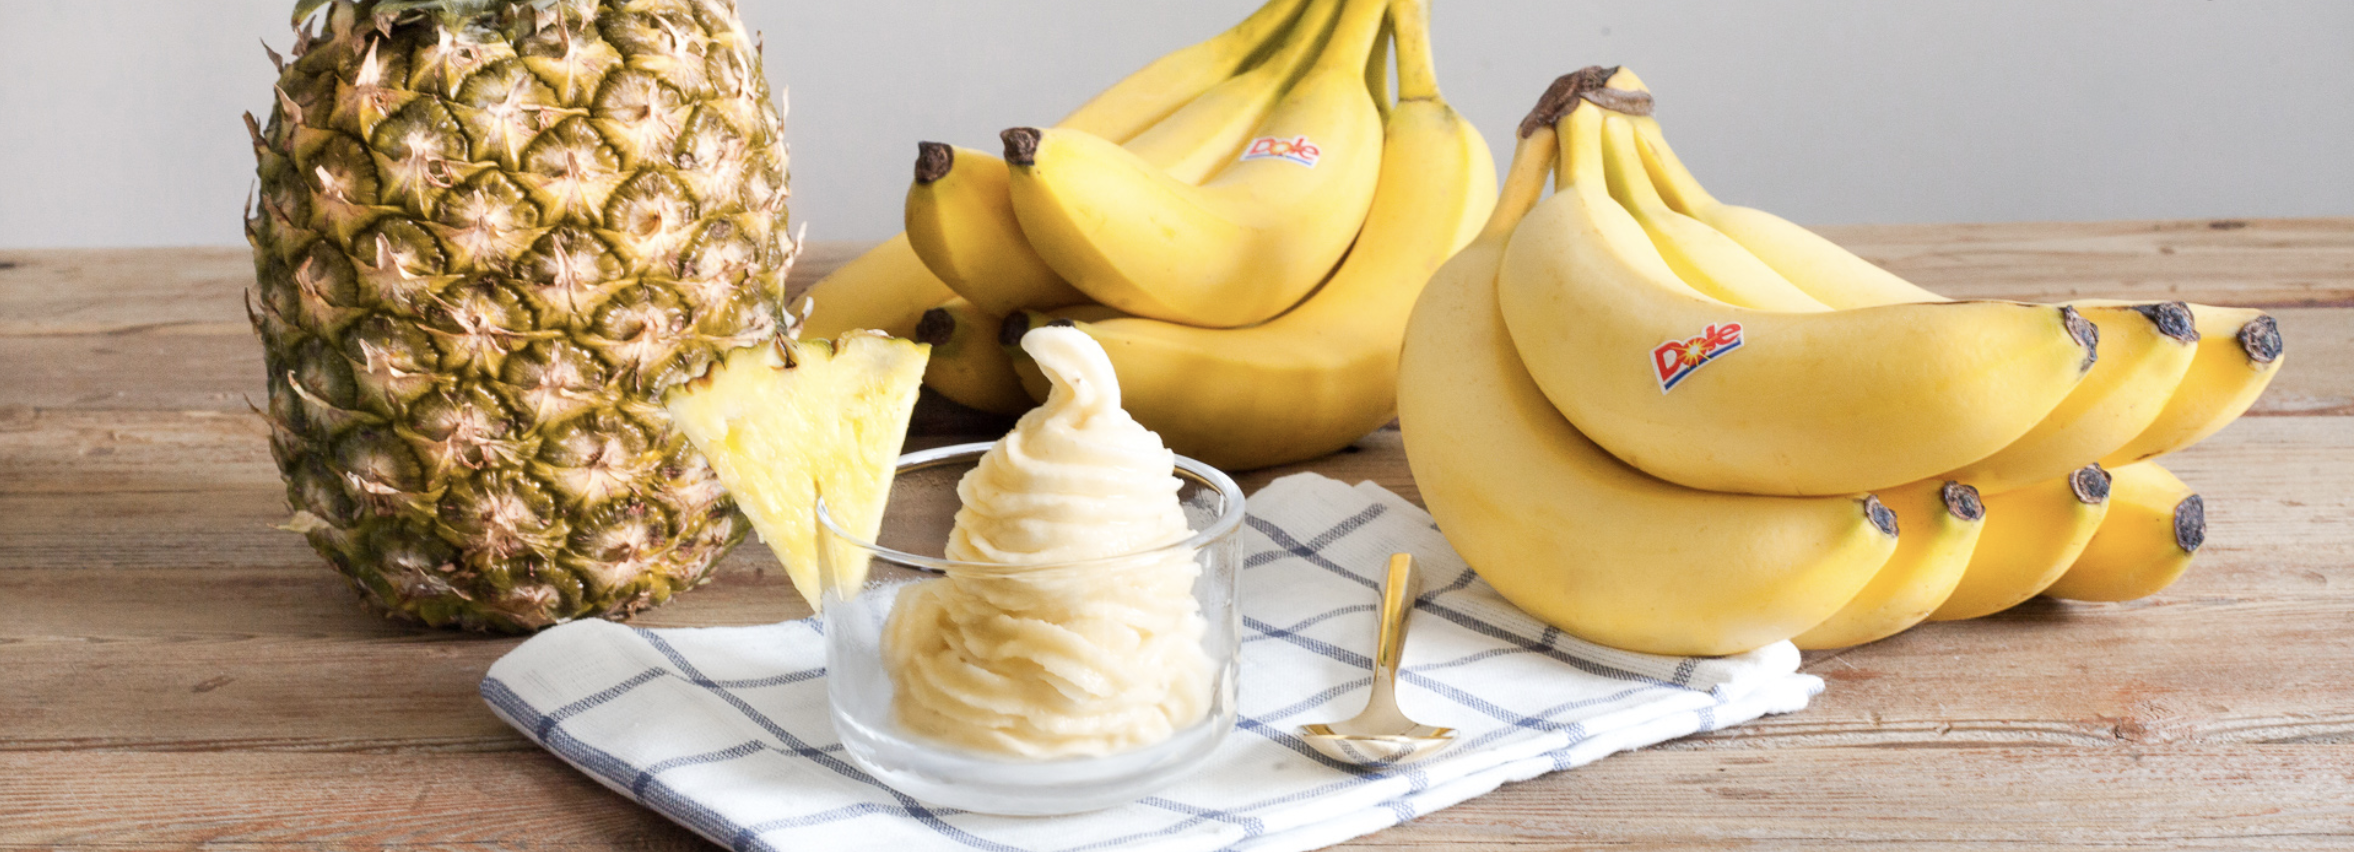 Make your own Dole Whip at home